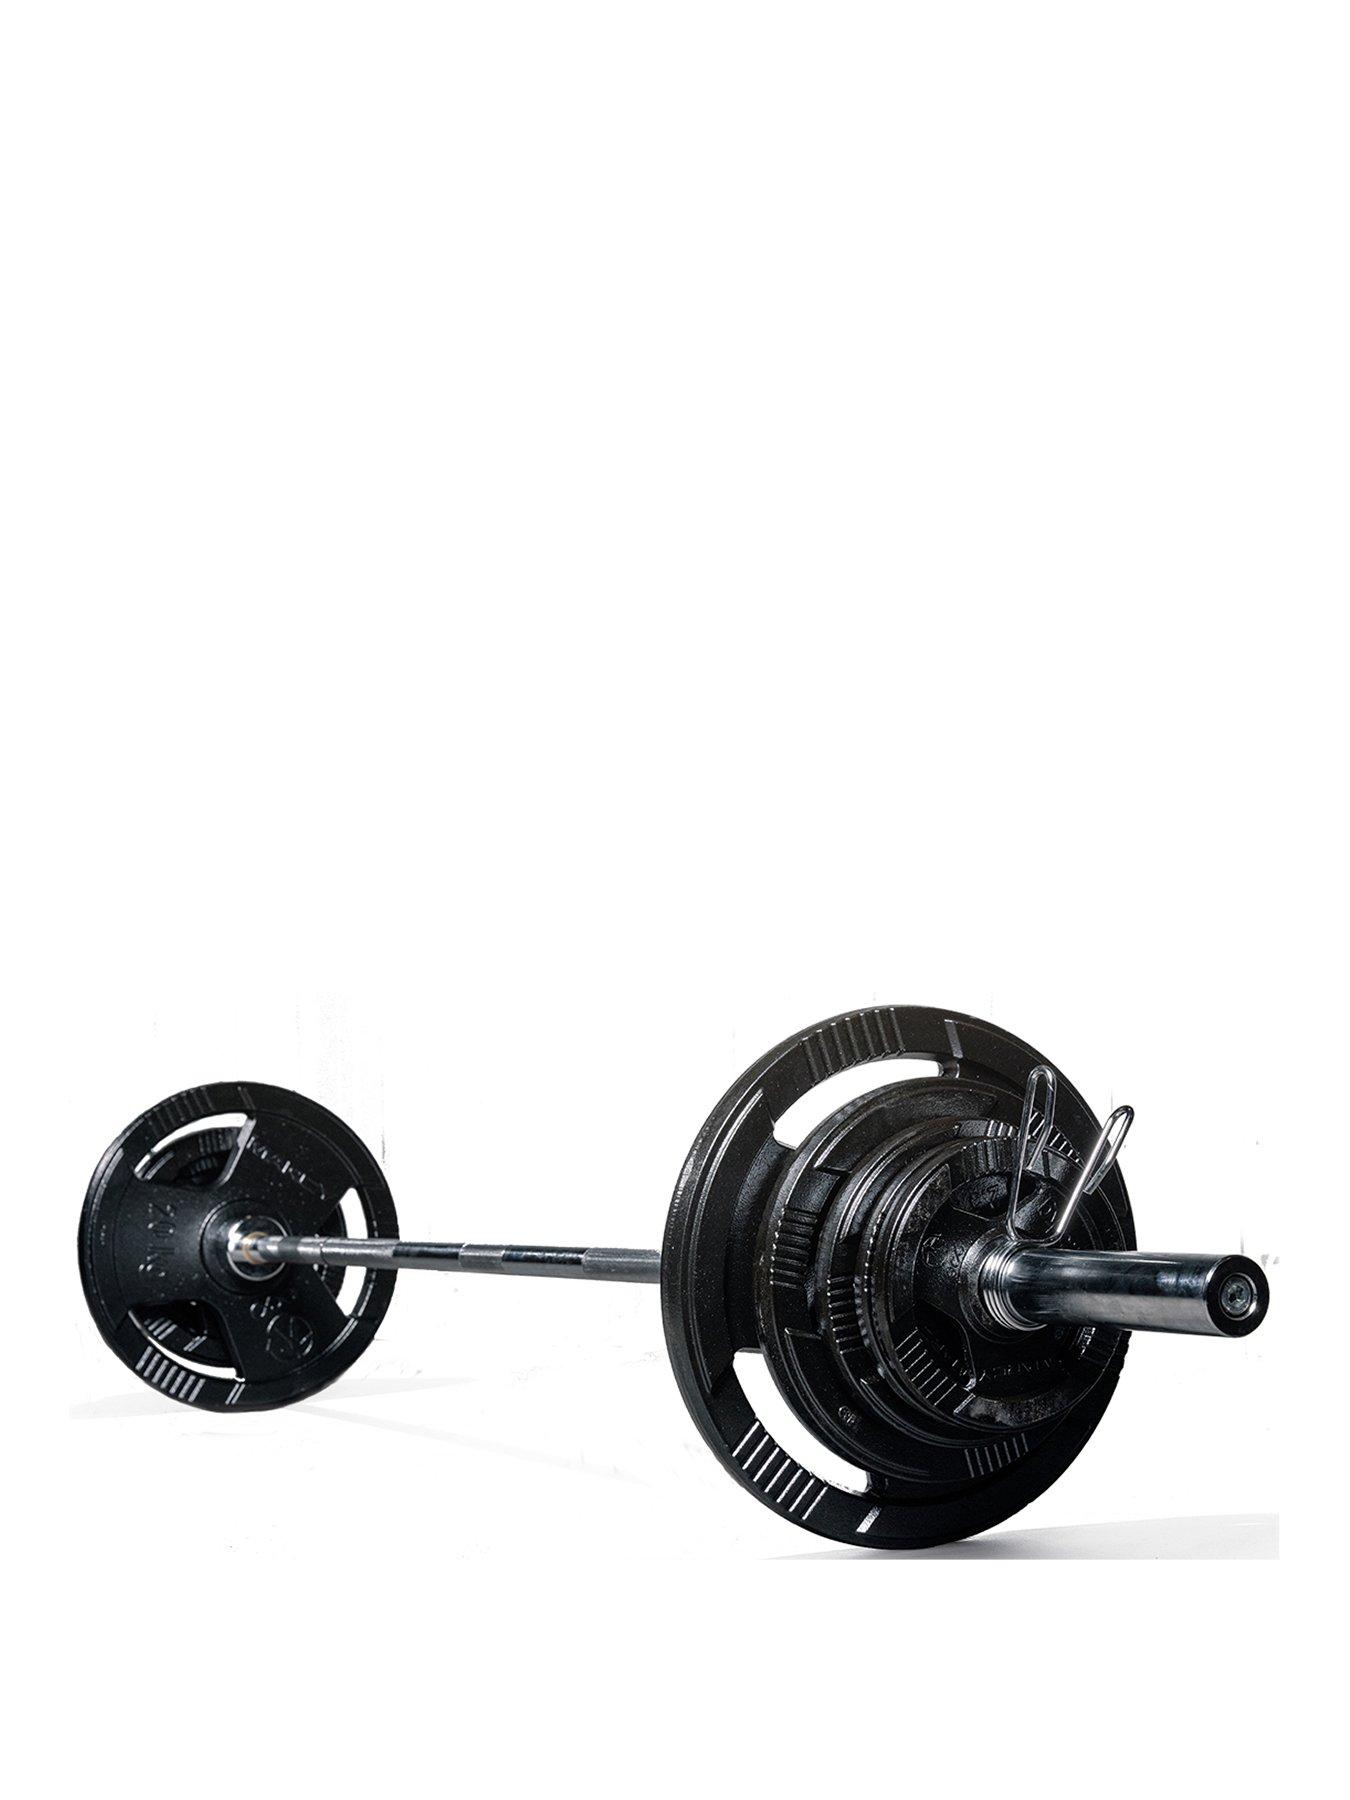 https://media.very.ie/i/littlewoodsireland/VTAN5_SQ1_0000000099_N_A_SLf/marcy-marcy-100-kg-weight-set-with-7ft-barbell.jpg?$180x240_retinamobilex2$